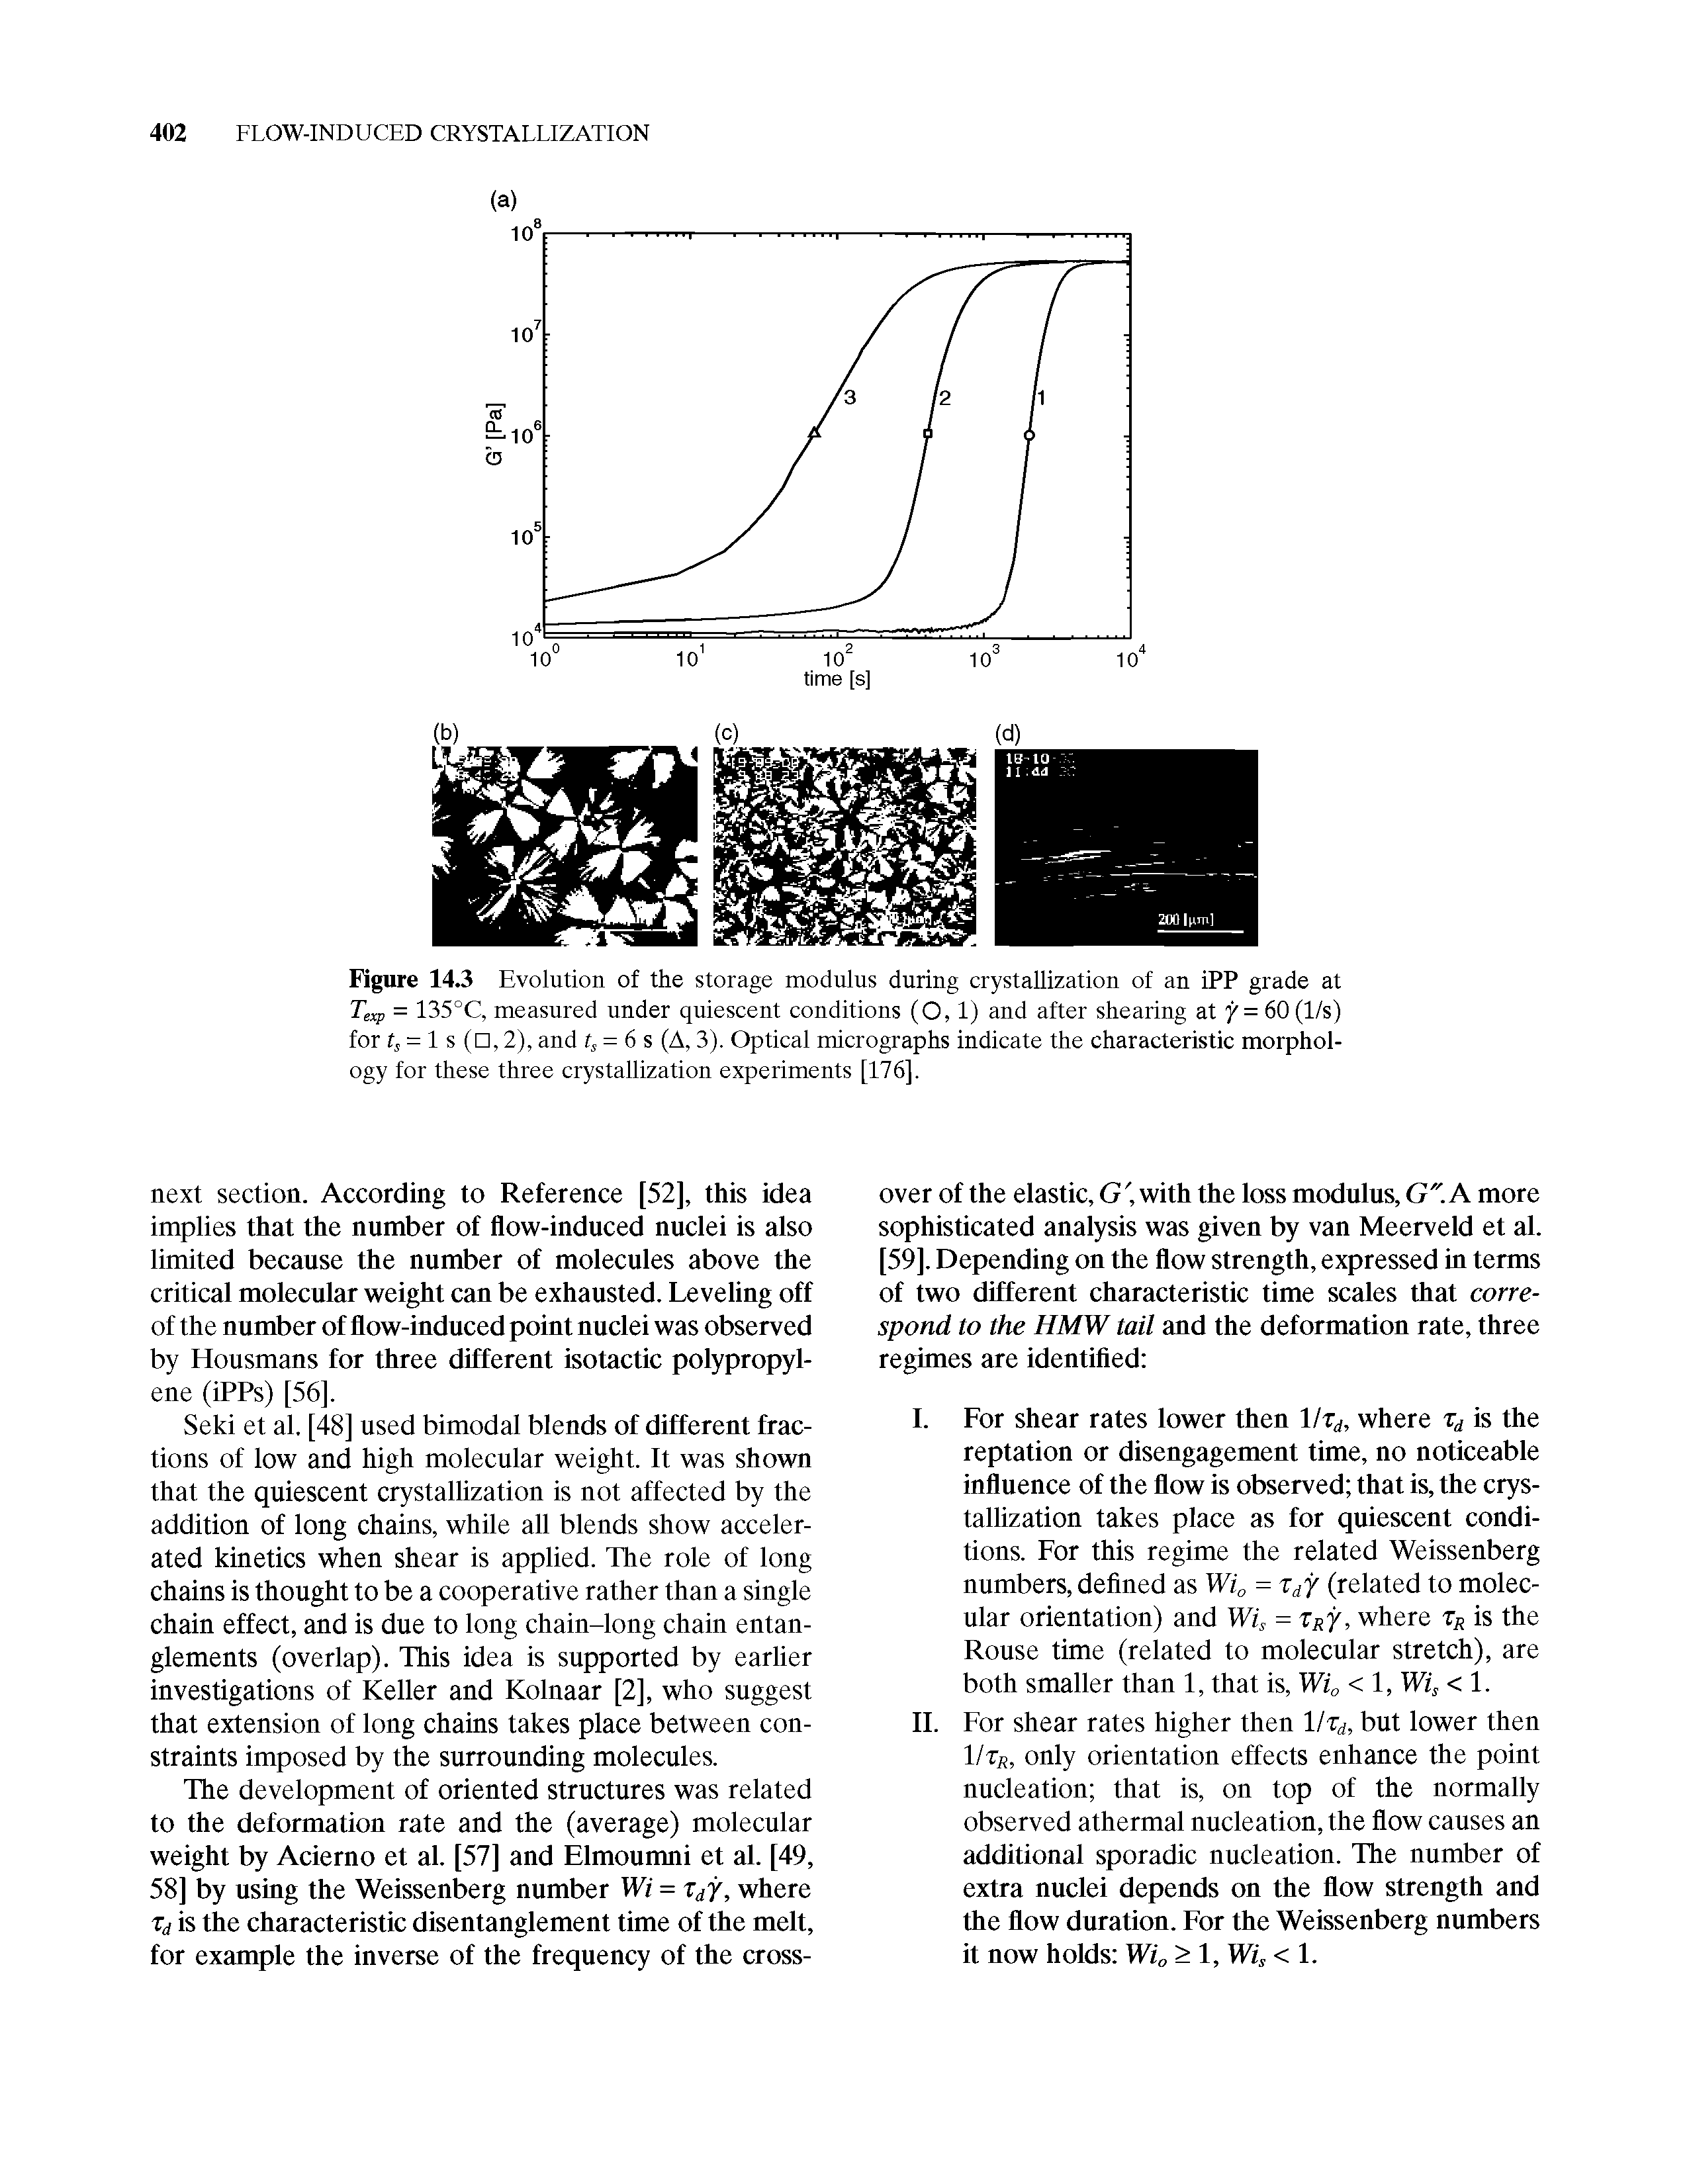 Figure 14.3 Evolution of the storage modulus during crystallization of an iPP grade at Texp = 135°C, measured under quiescent conditions (0,1) and after shearing at 7=60(l/s) for fj = 1 s ( , 2), and = 6 s (A, 3). Optical micrographs indicate the characteristic morphology for these three crystallization experiments [176],...